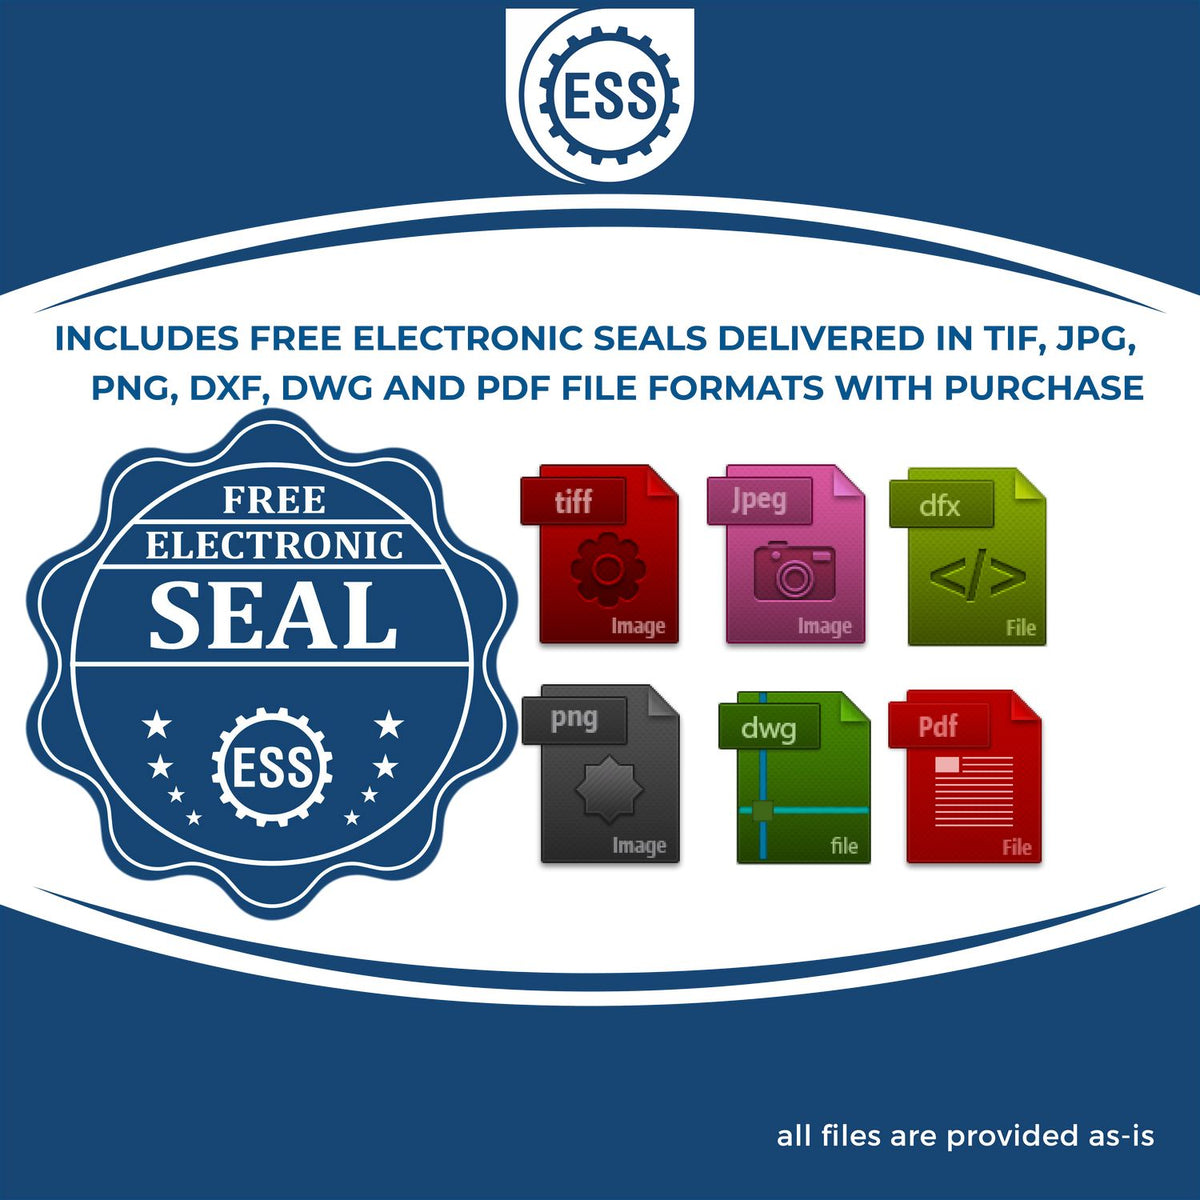 An infographic for the free electronic seal for the Wooden Handle Utah State Seal Notary Public Stamp illustrating the different file type icons such as DXF, DWG, TIF, JPG and PNG.